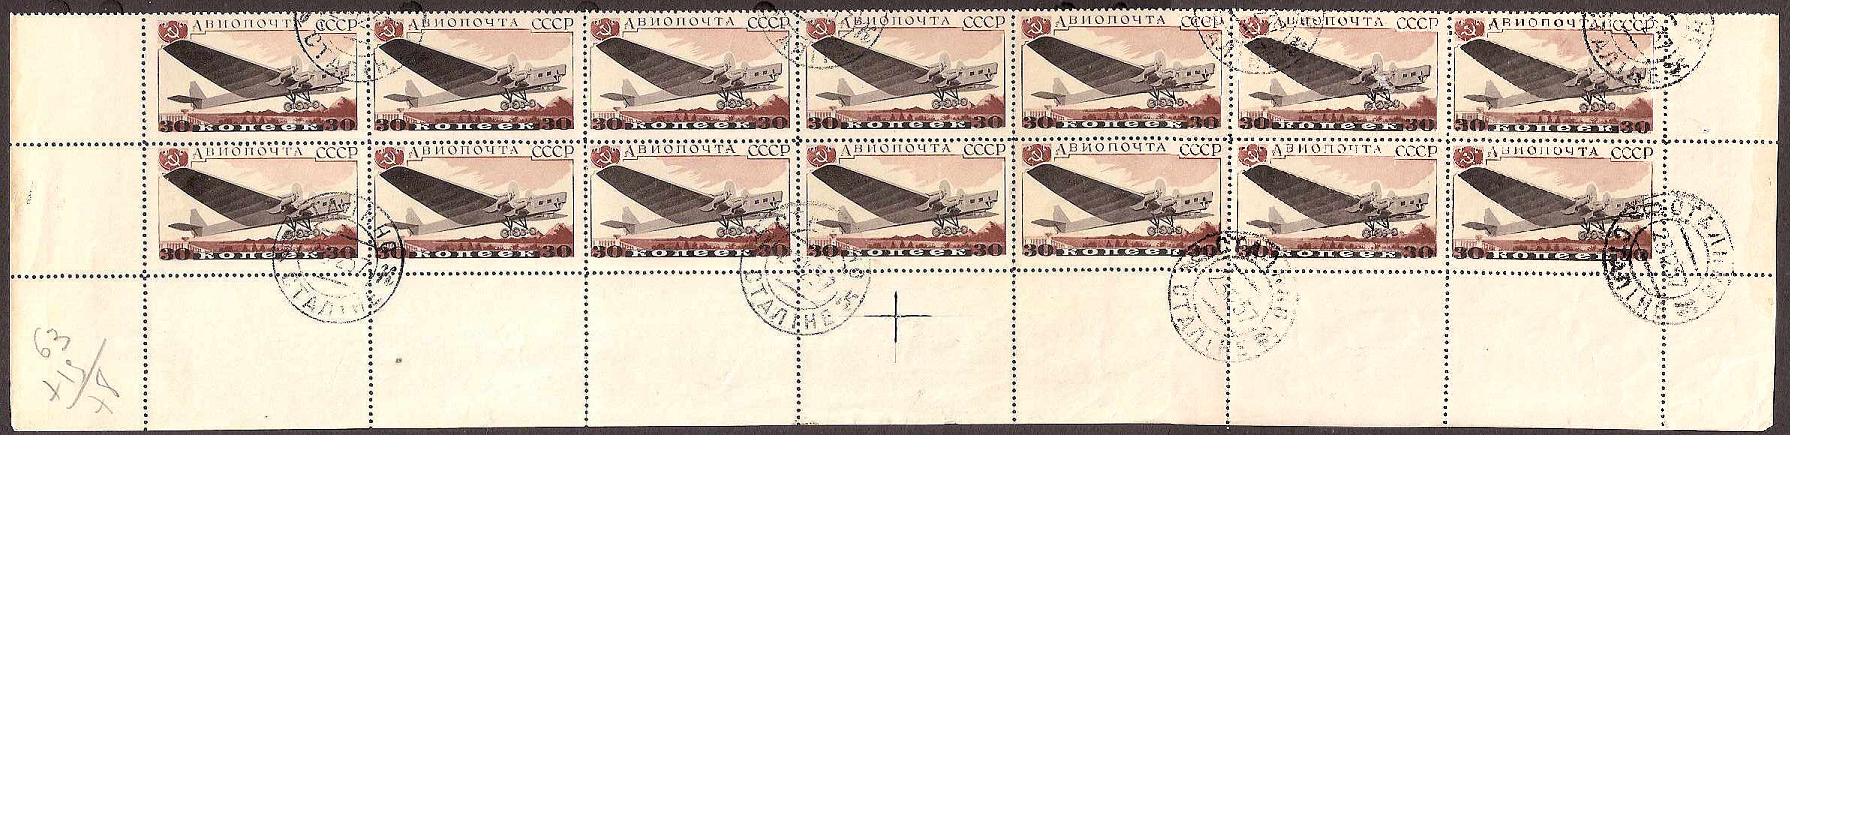 Russia Specialized - Airmail & Special Delivery Cheliuskin issue Scott C71 